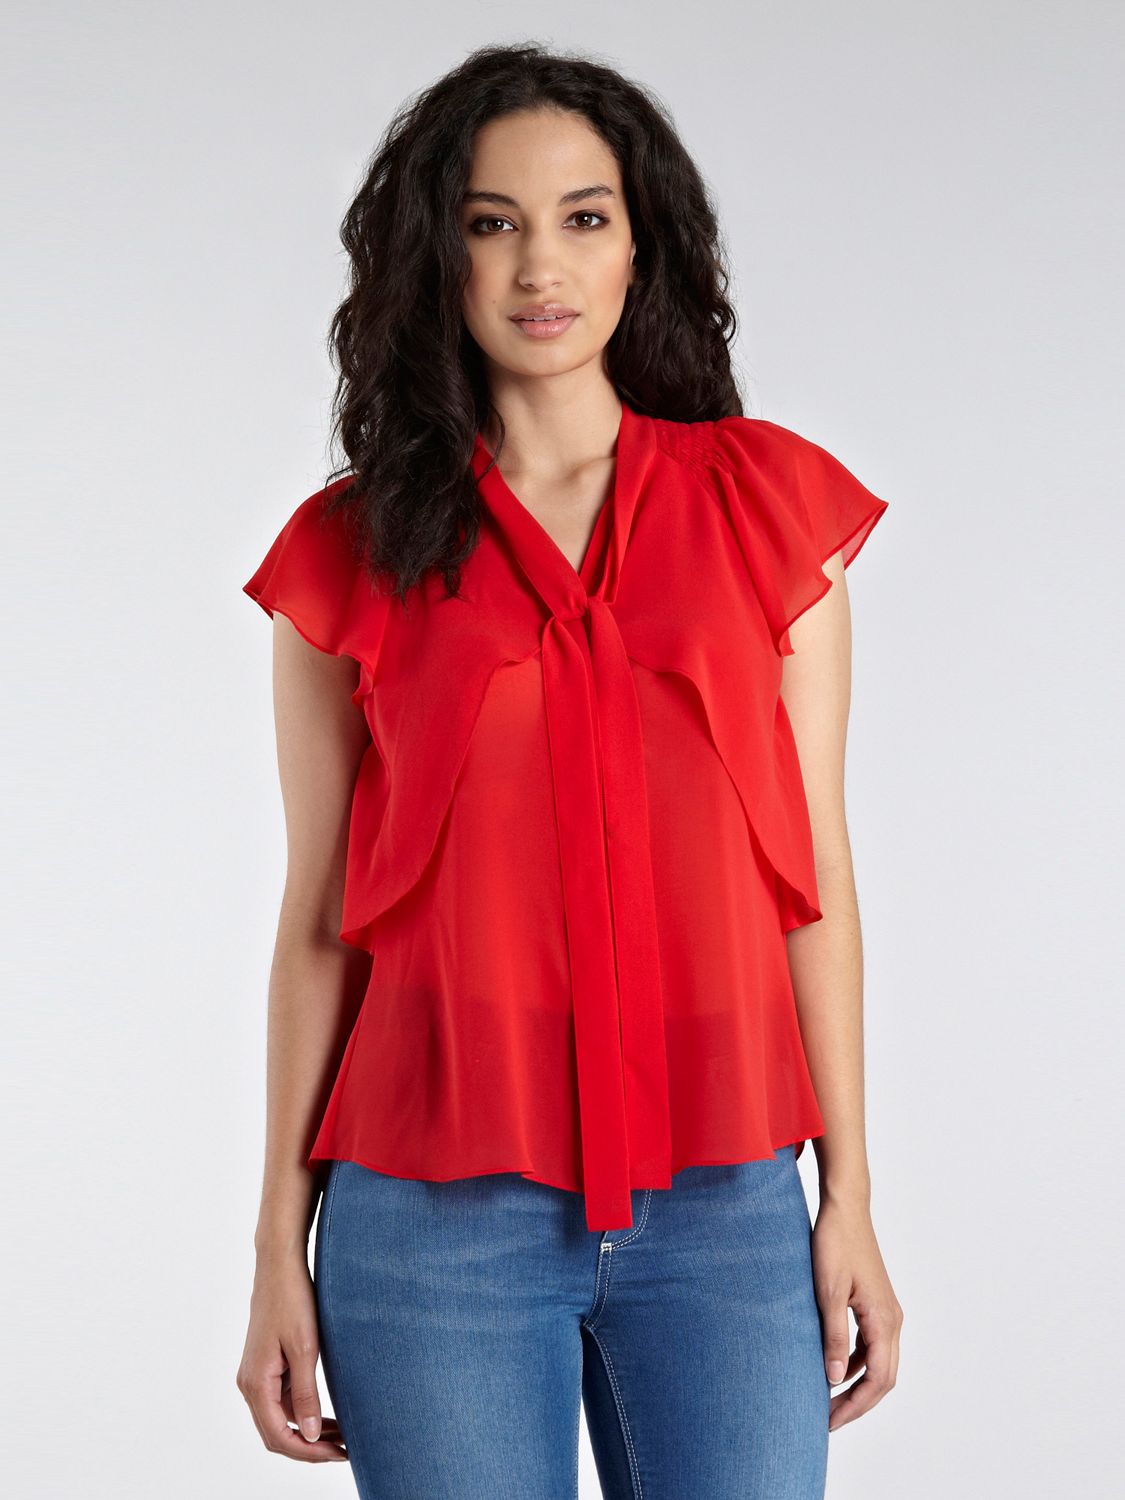 Warehouse Tie Neck Frill Blouse, Bright Red